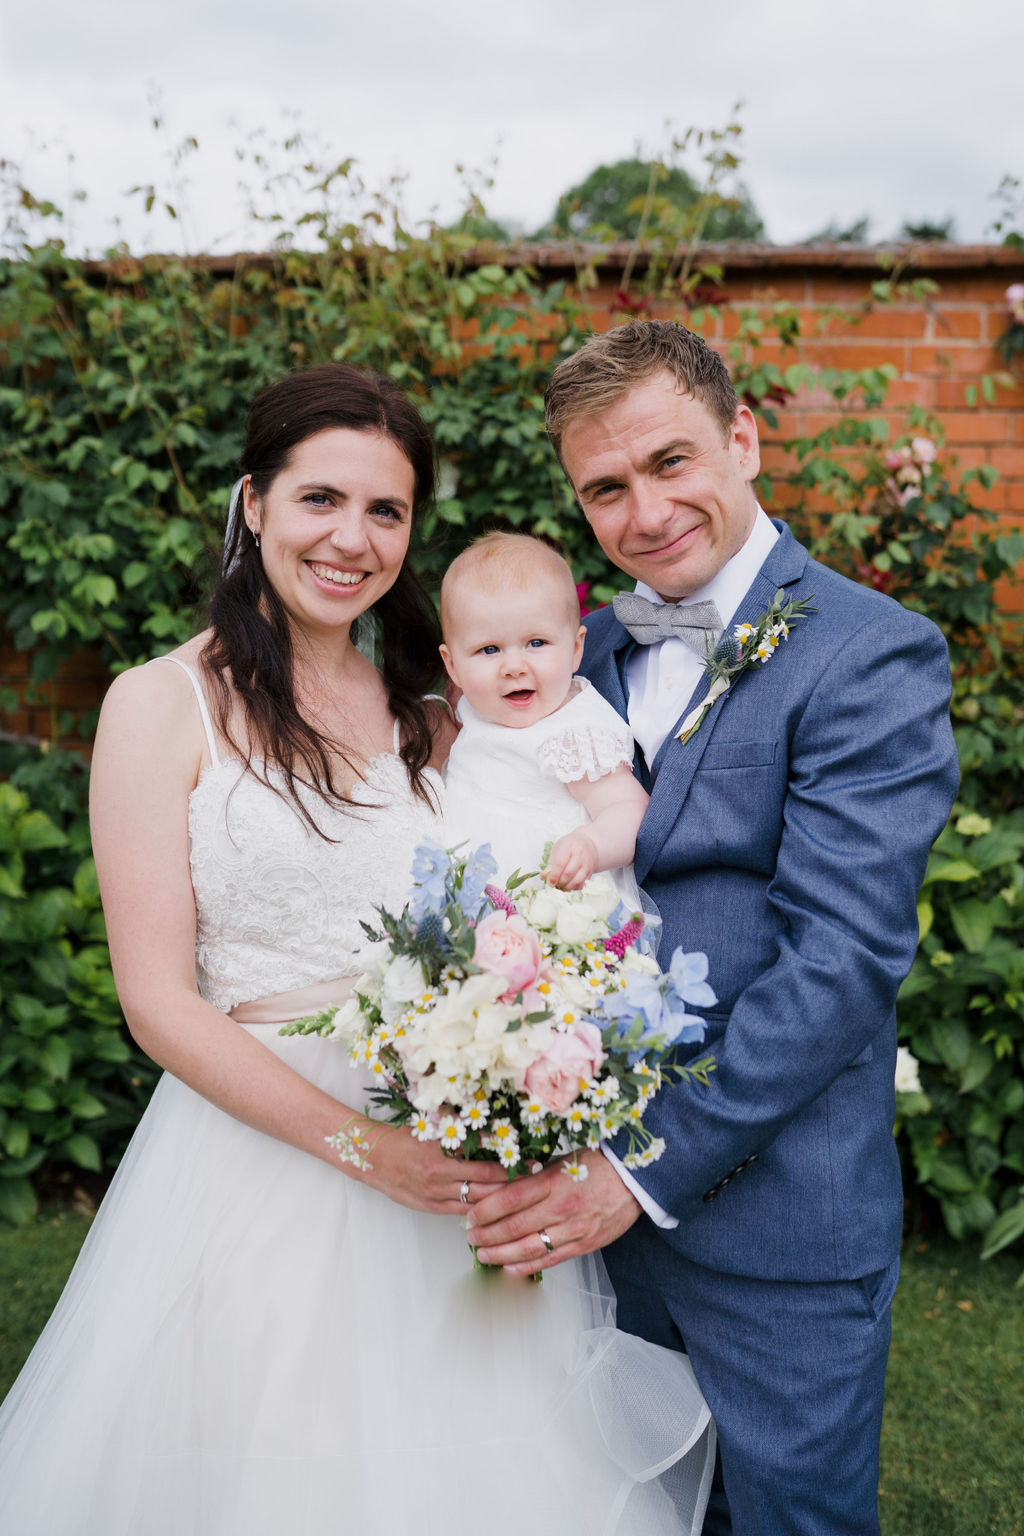 Upton Barn and Walled Gardens wedding, the bride, groom and daughter.